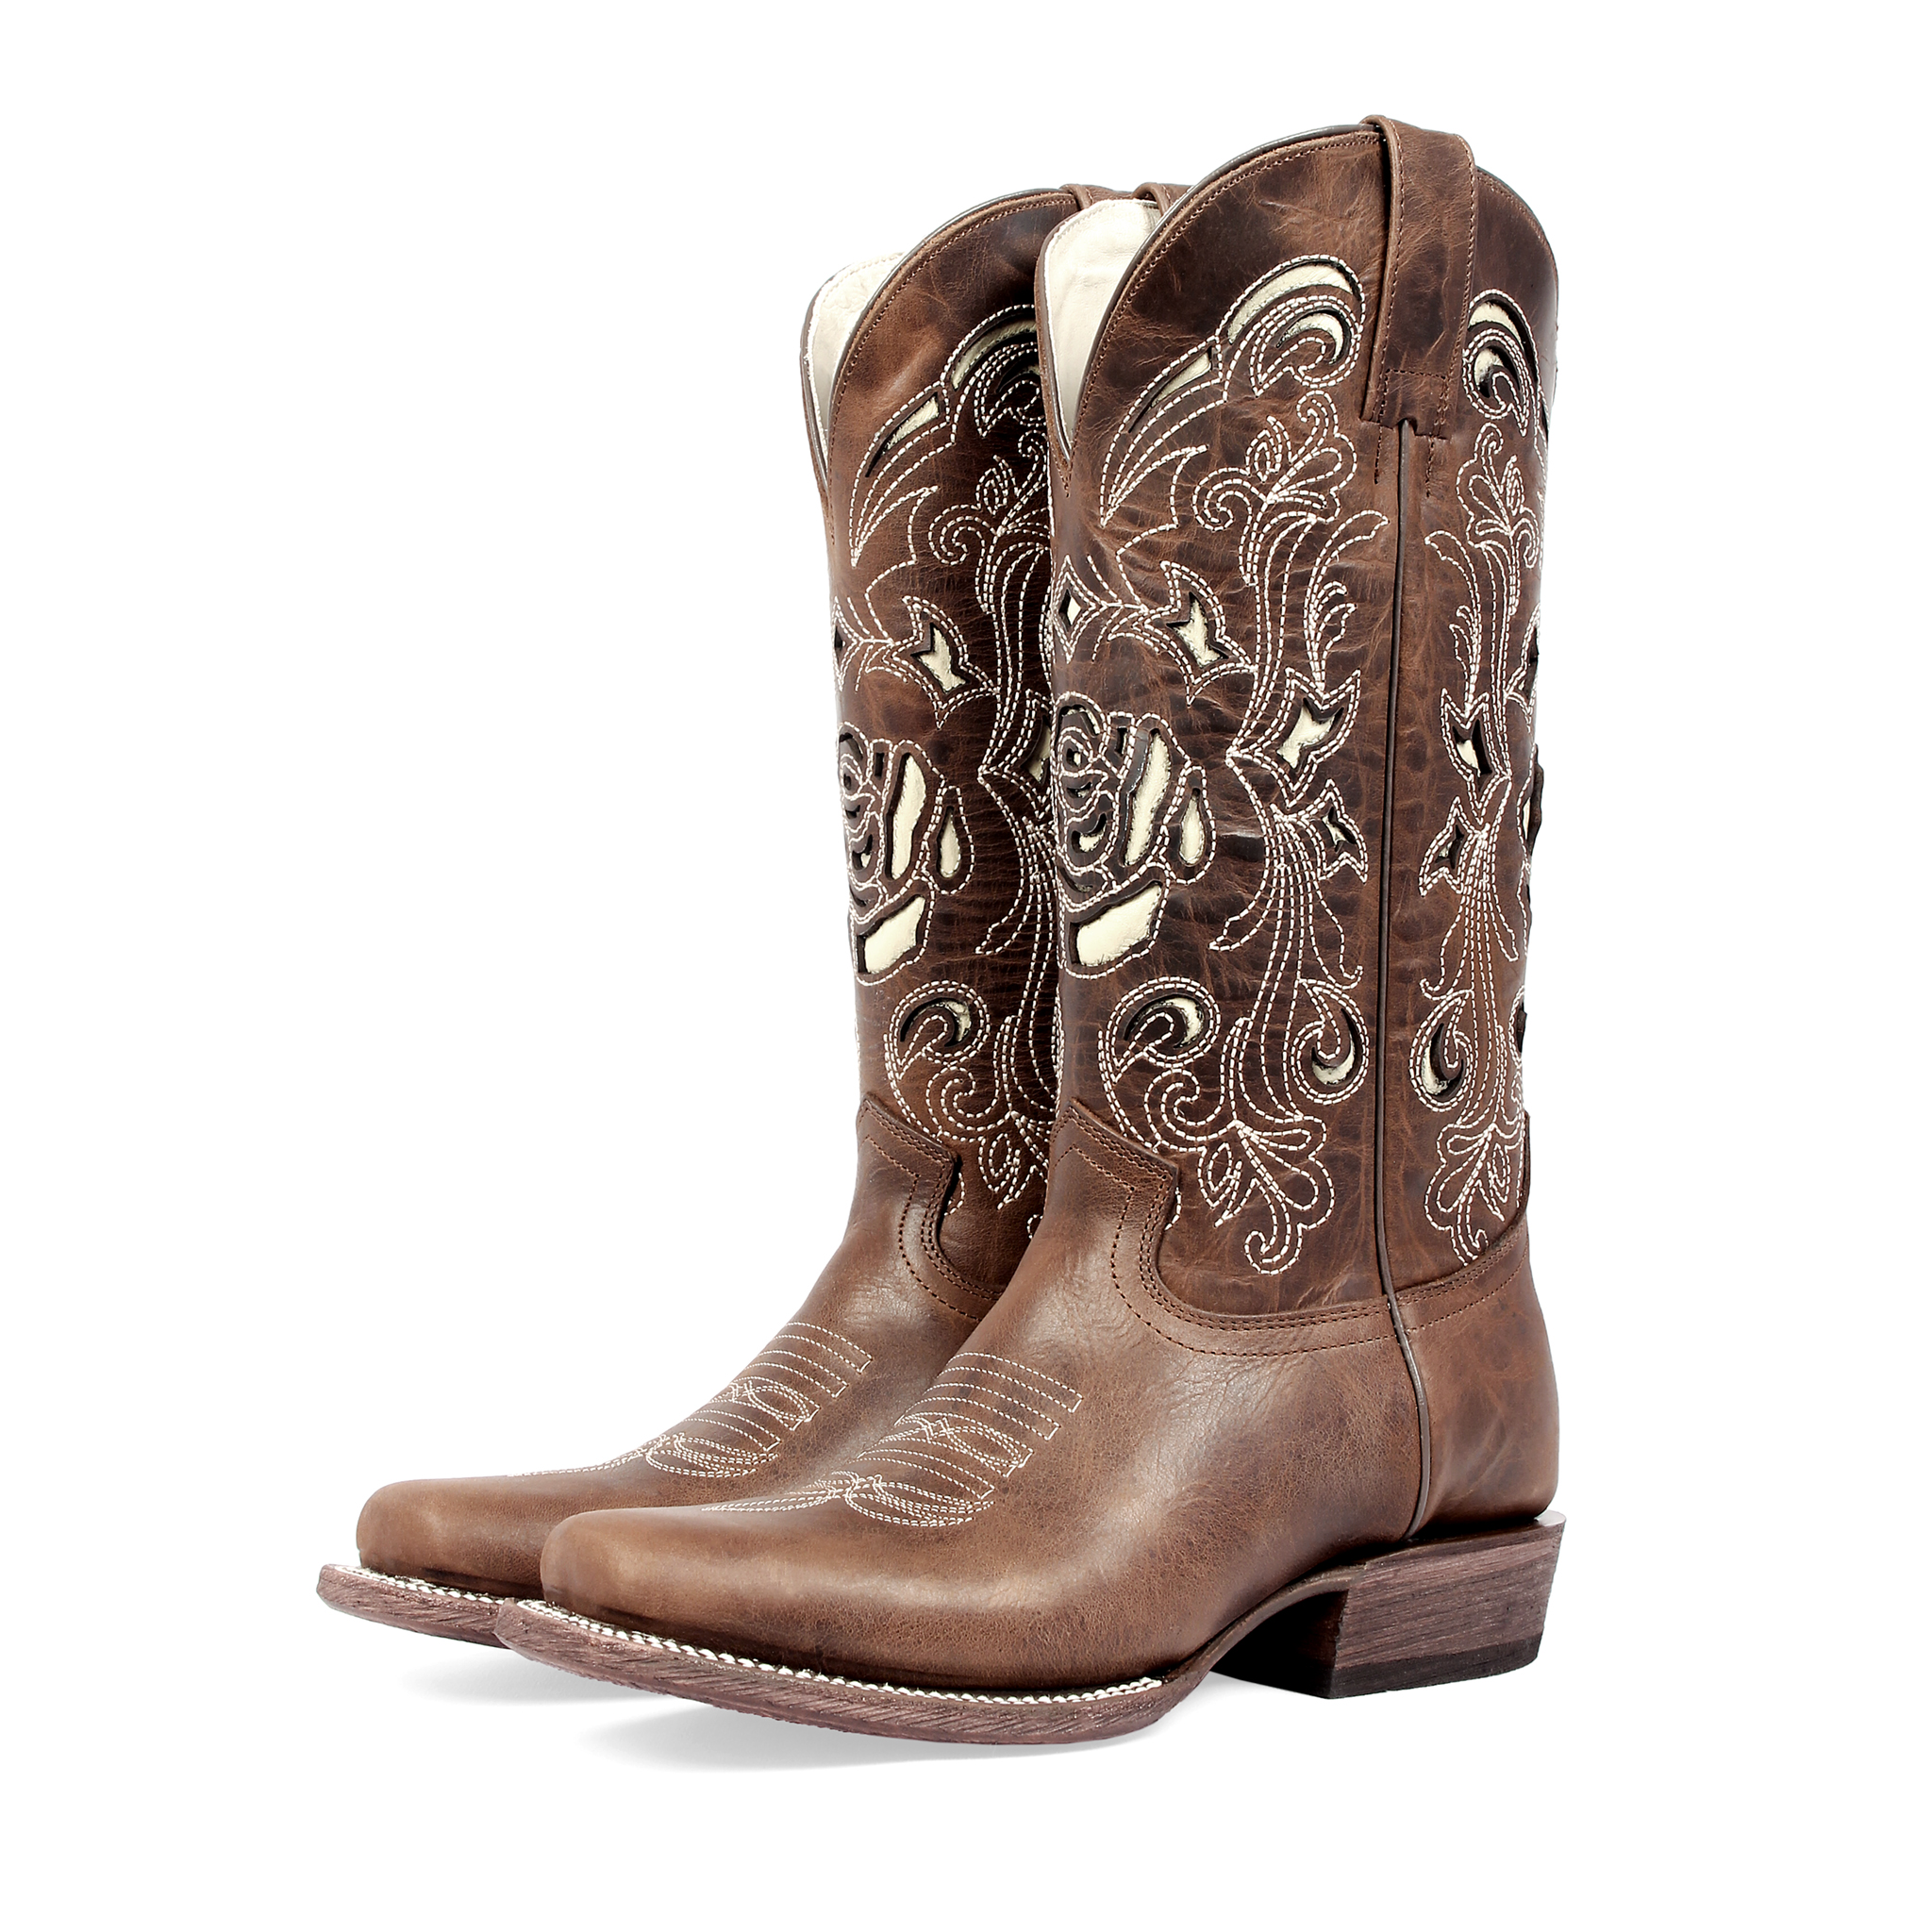 pair of cowboy boots